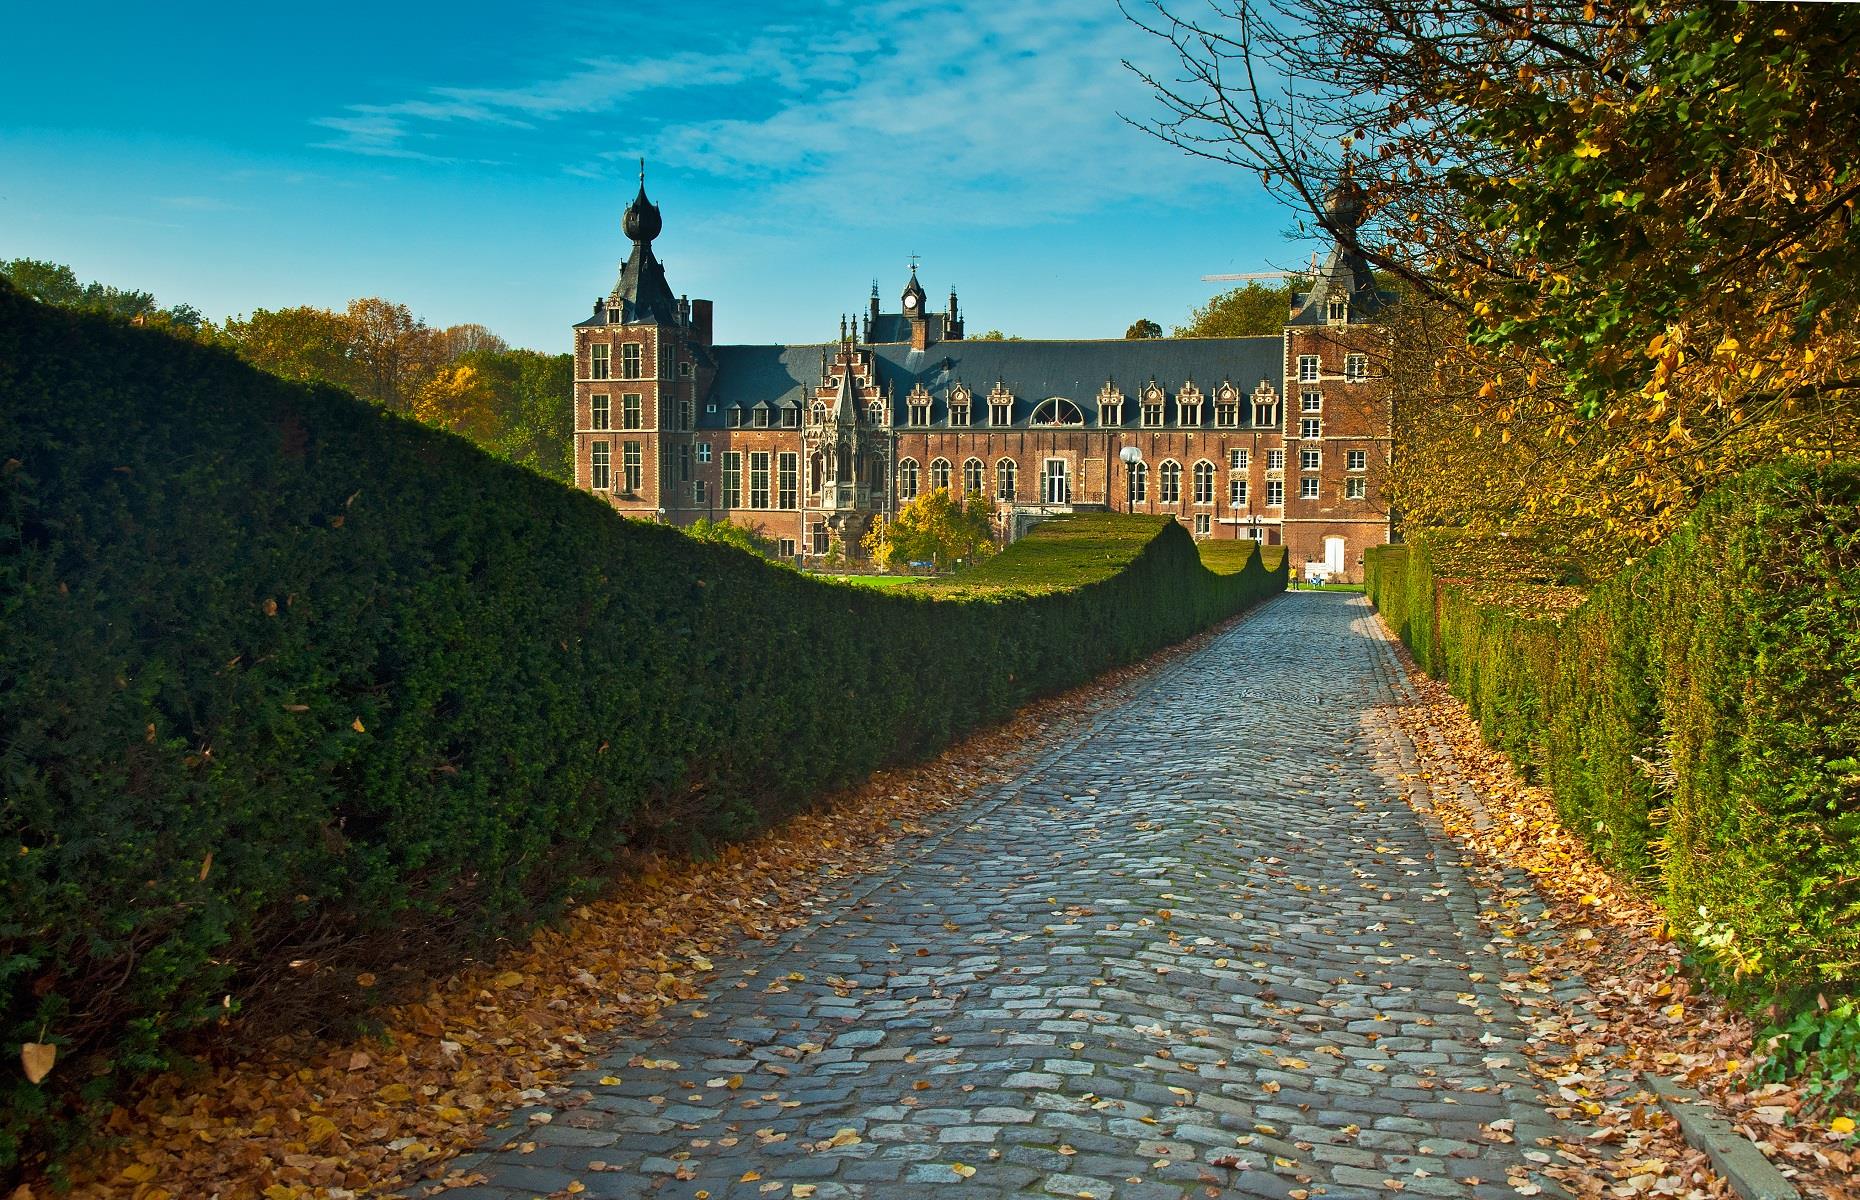 <p>Over in Leuven, Belgium, you'll find a university that could be plucked from the pages of a storybook. <a href="https://www.kuleuven.be/english/">Katholieke Universiteit Leuven</a> was founded in 1425 and, as such, is one of Europe’s oldest. The university owns an array of buildings, including three absolute jewels: the University Library of Leuven, Arenberg Castle (pictured) and University Hall. Formerly a cloth makers’ hall, the latter was constructed in 1317 and is now the heart of this important institution.</p>